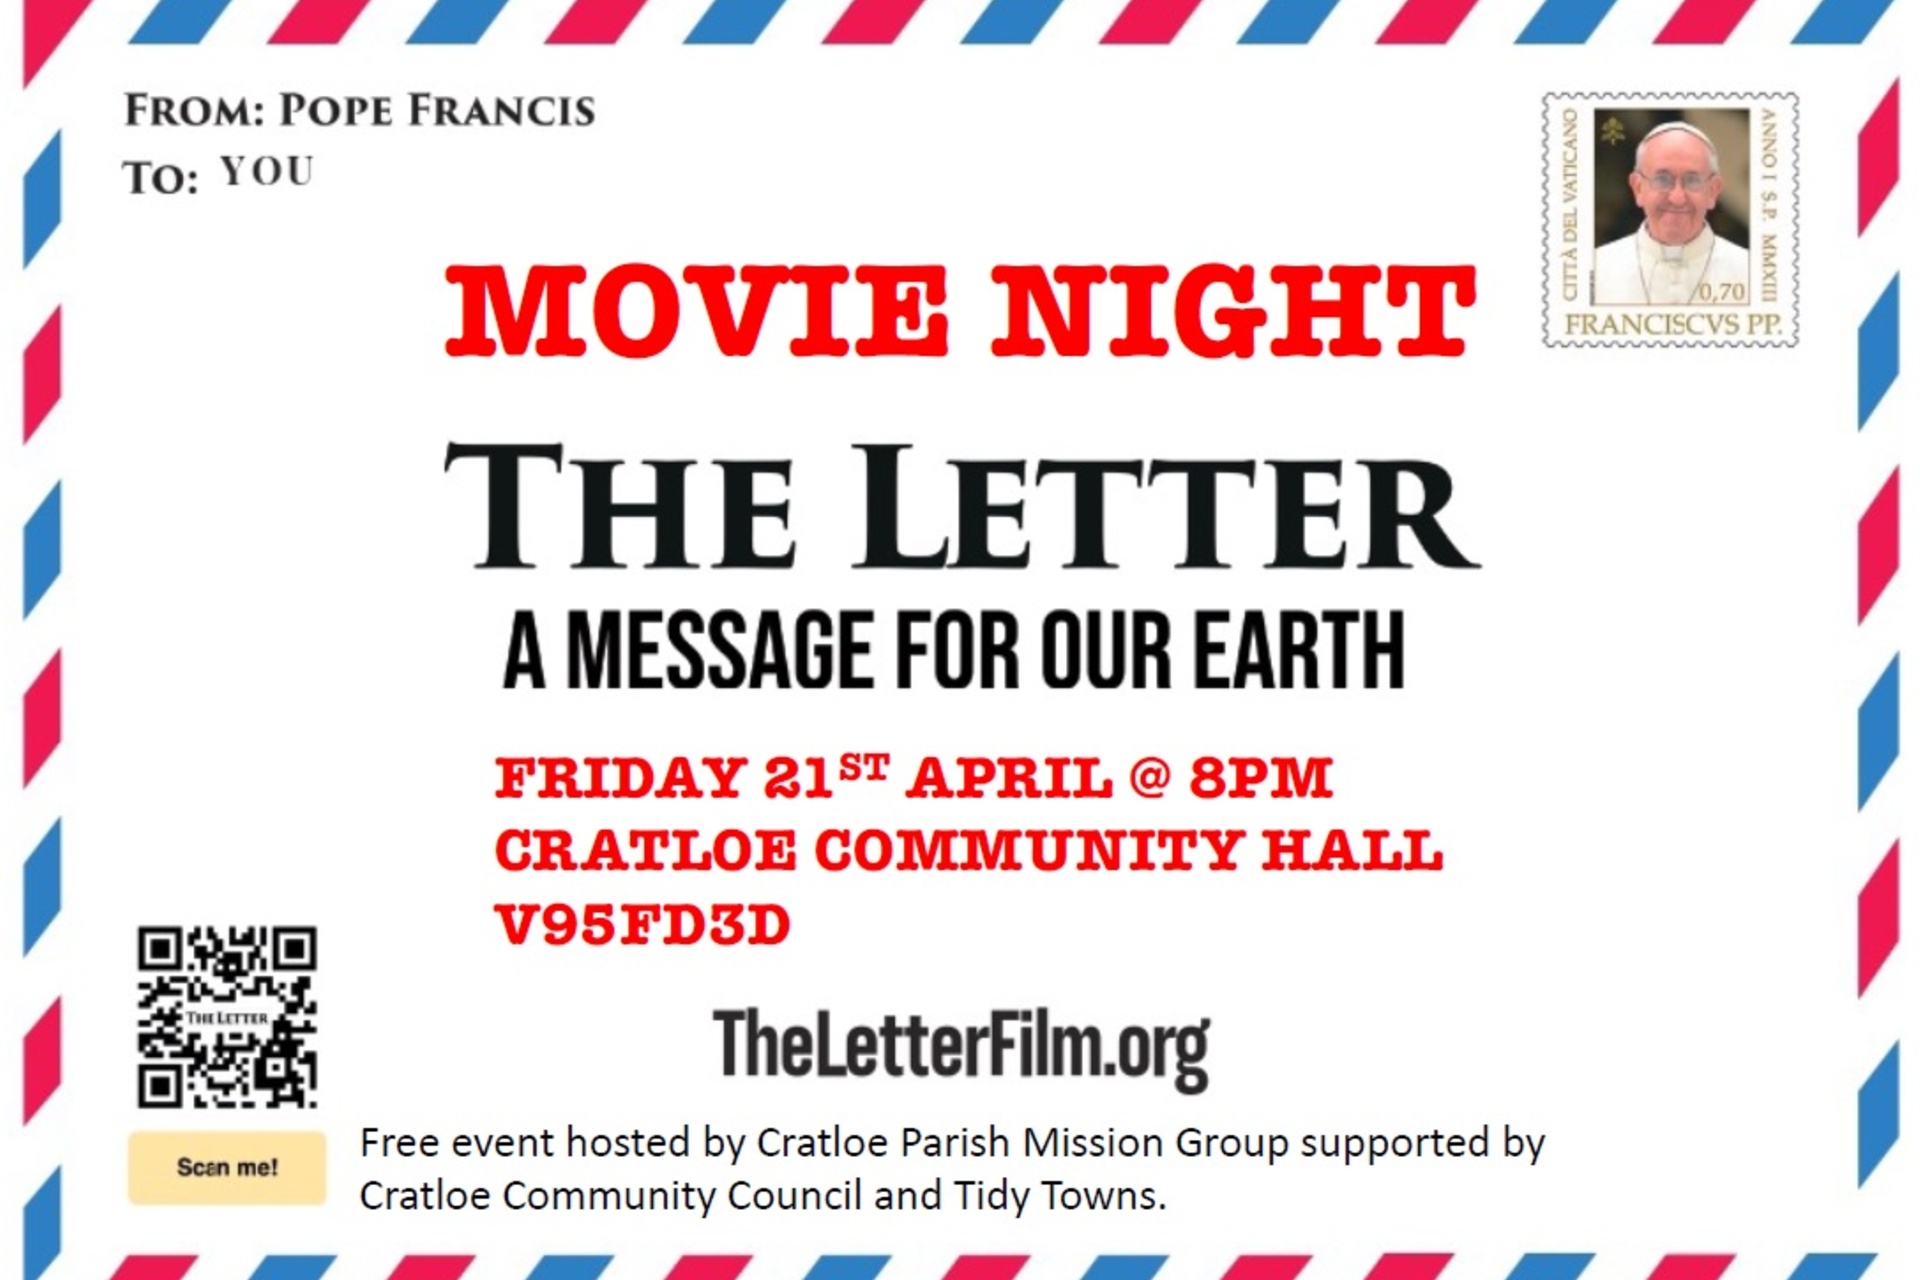 The Letter – A Message for our Earth